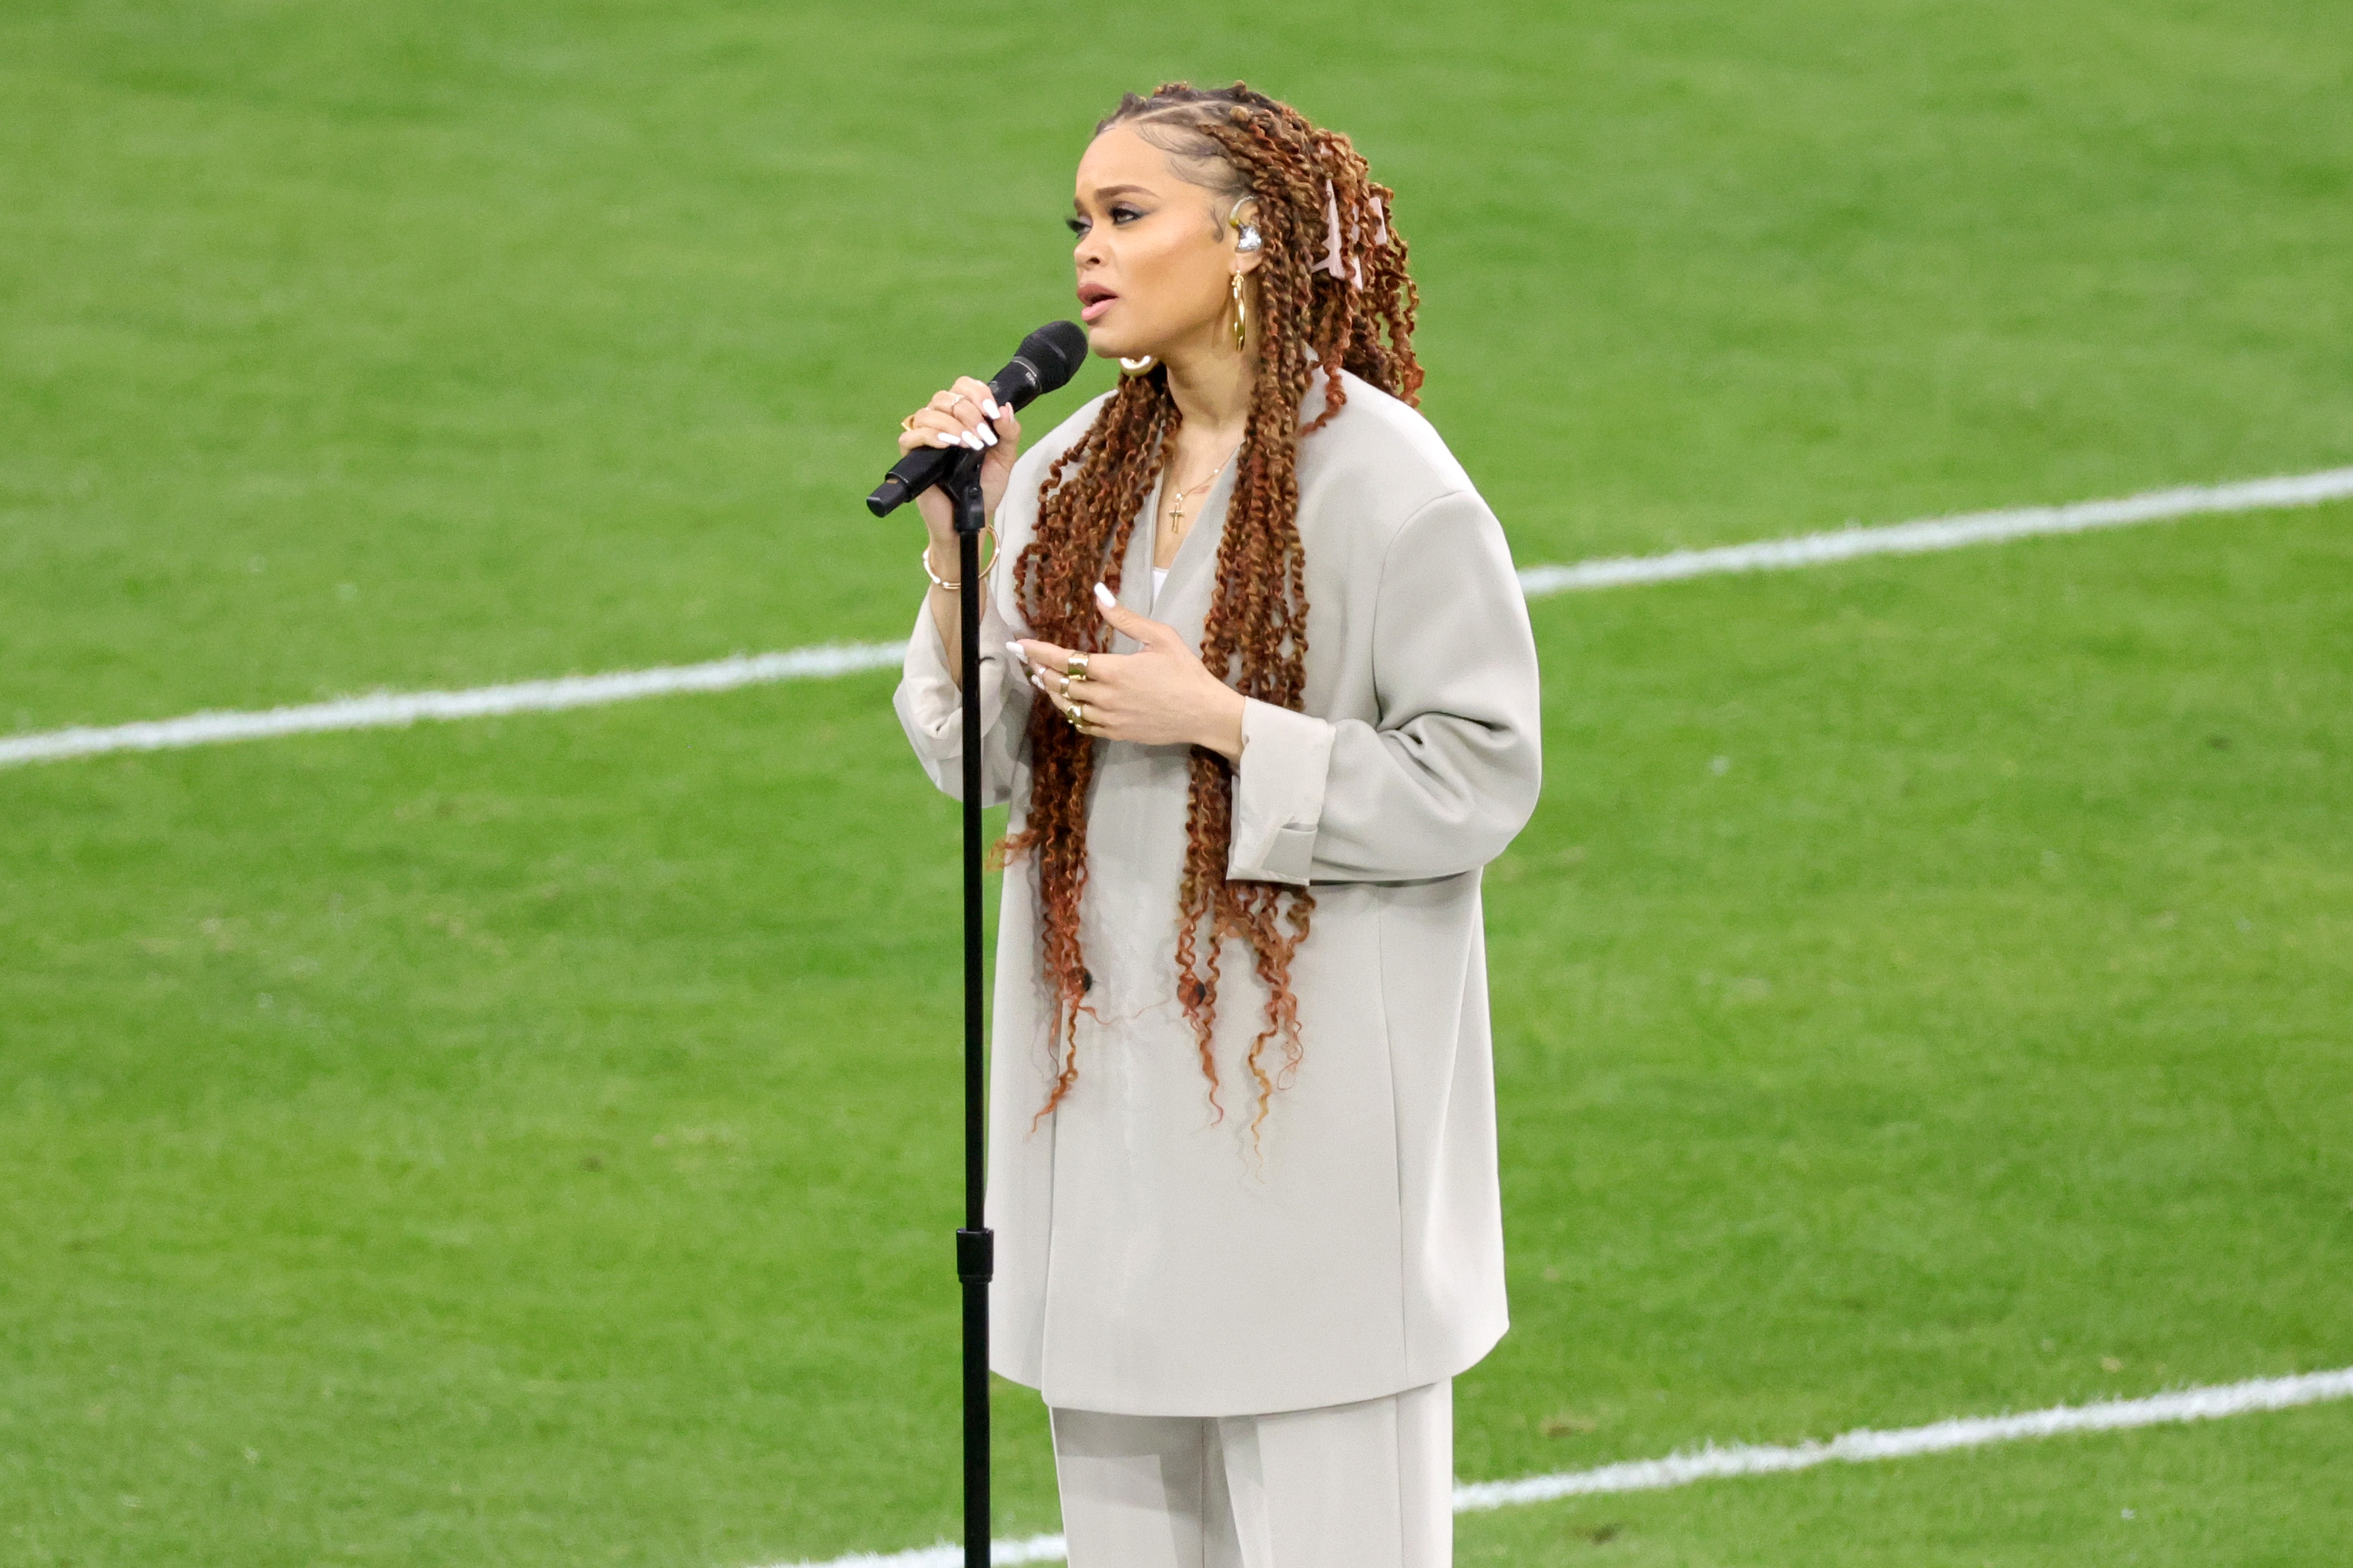 Andra Day singing on the field